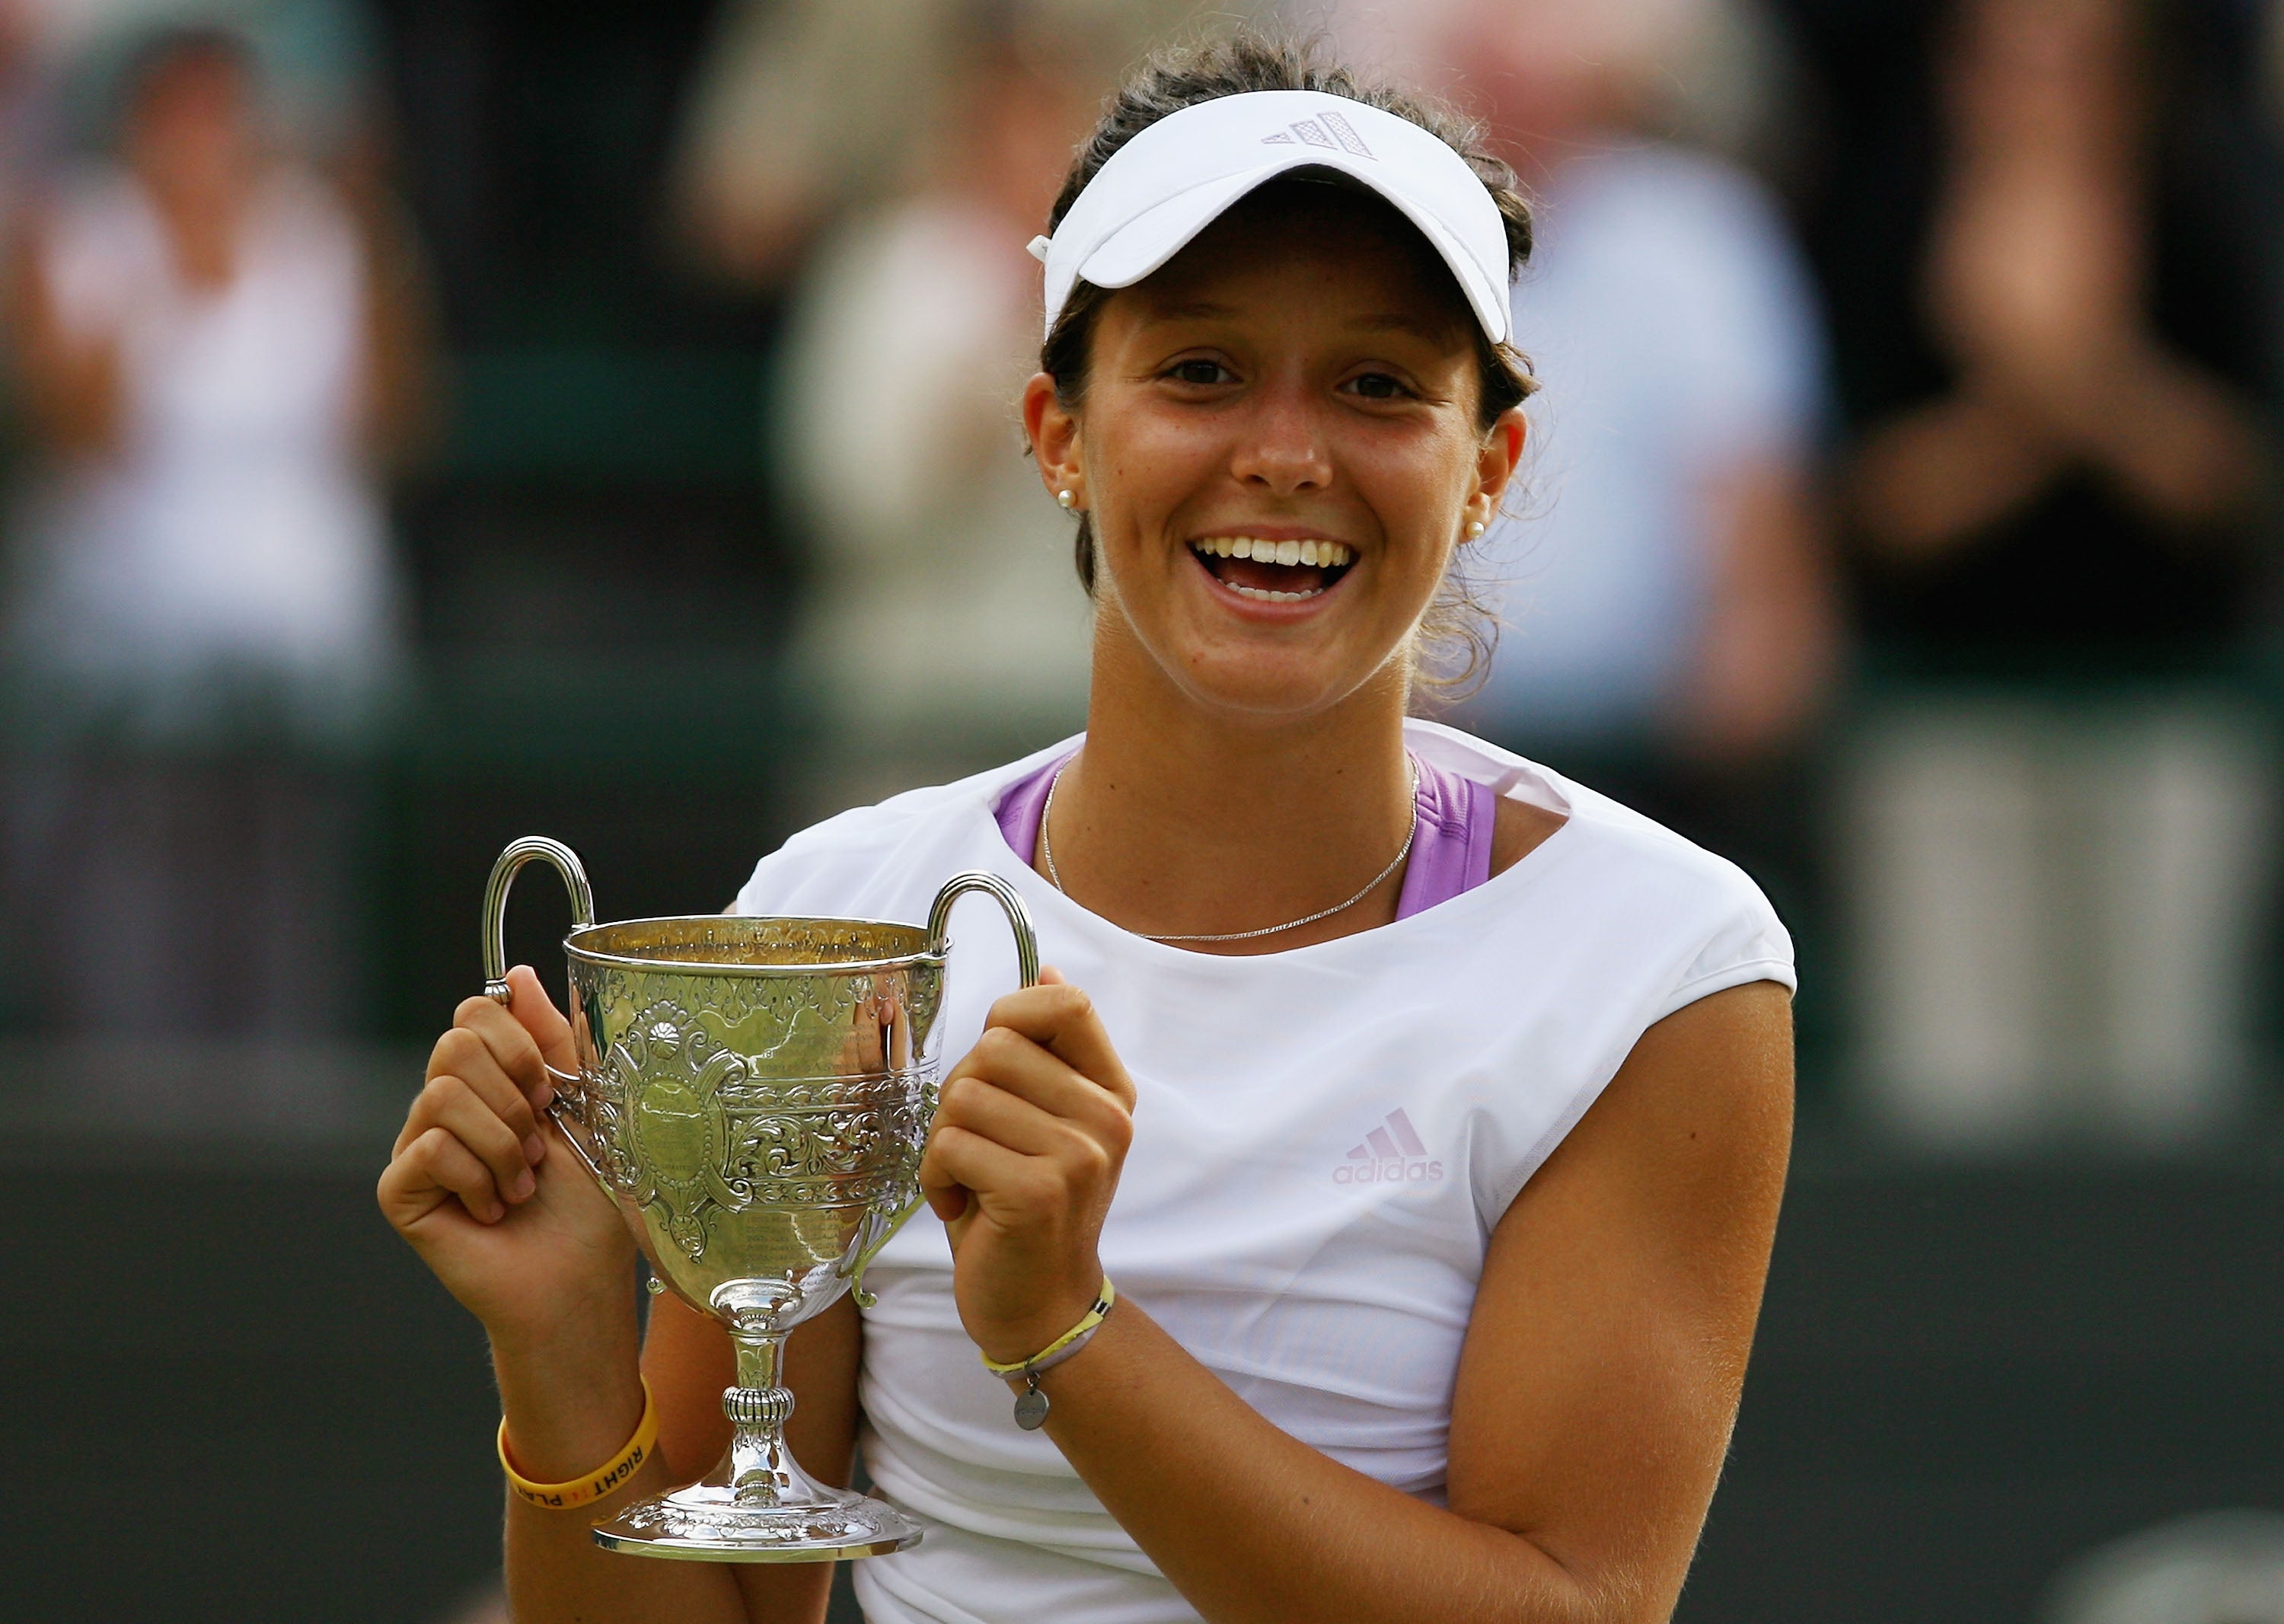 Robson won the junior title at Wimbledon in 2008